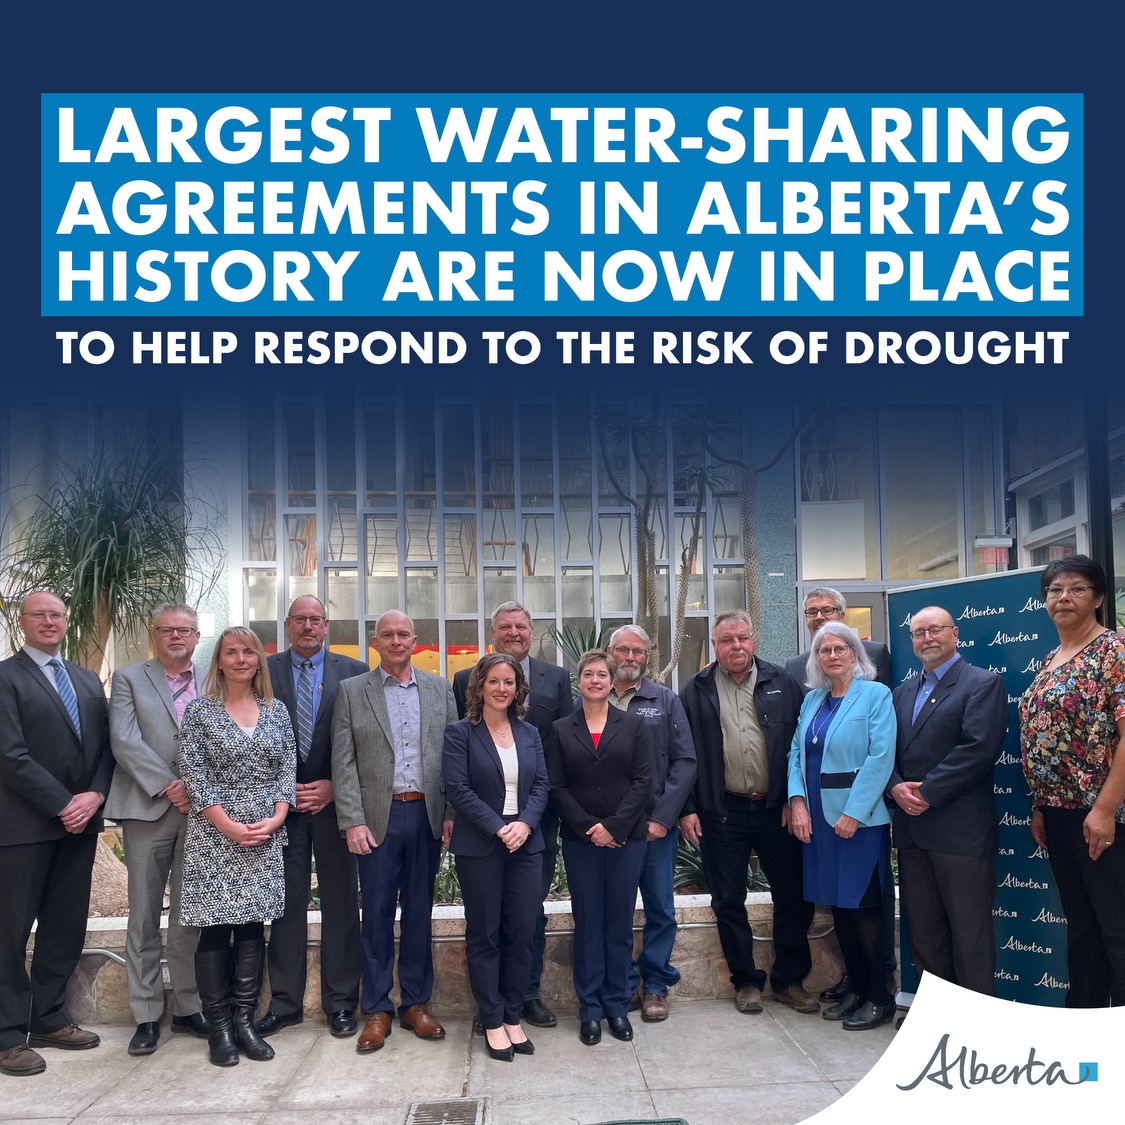 🚰Alberta's major water users are leading the way! 38 parties signed historic water-sharing agreements to manage limited supplies in the South Saskatchewan River Basin. 💧#WaterConservation #DroughtPreparedness

If severe #drought hits this summer, these voluntary agreements